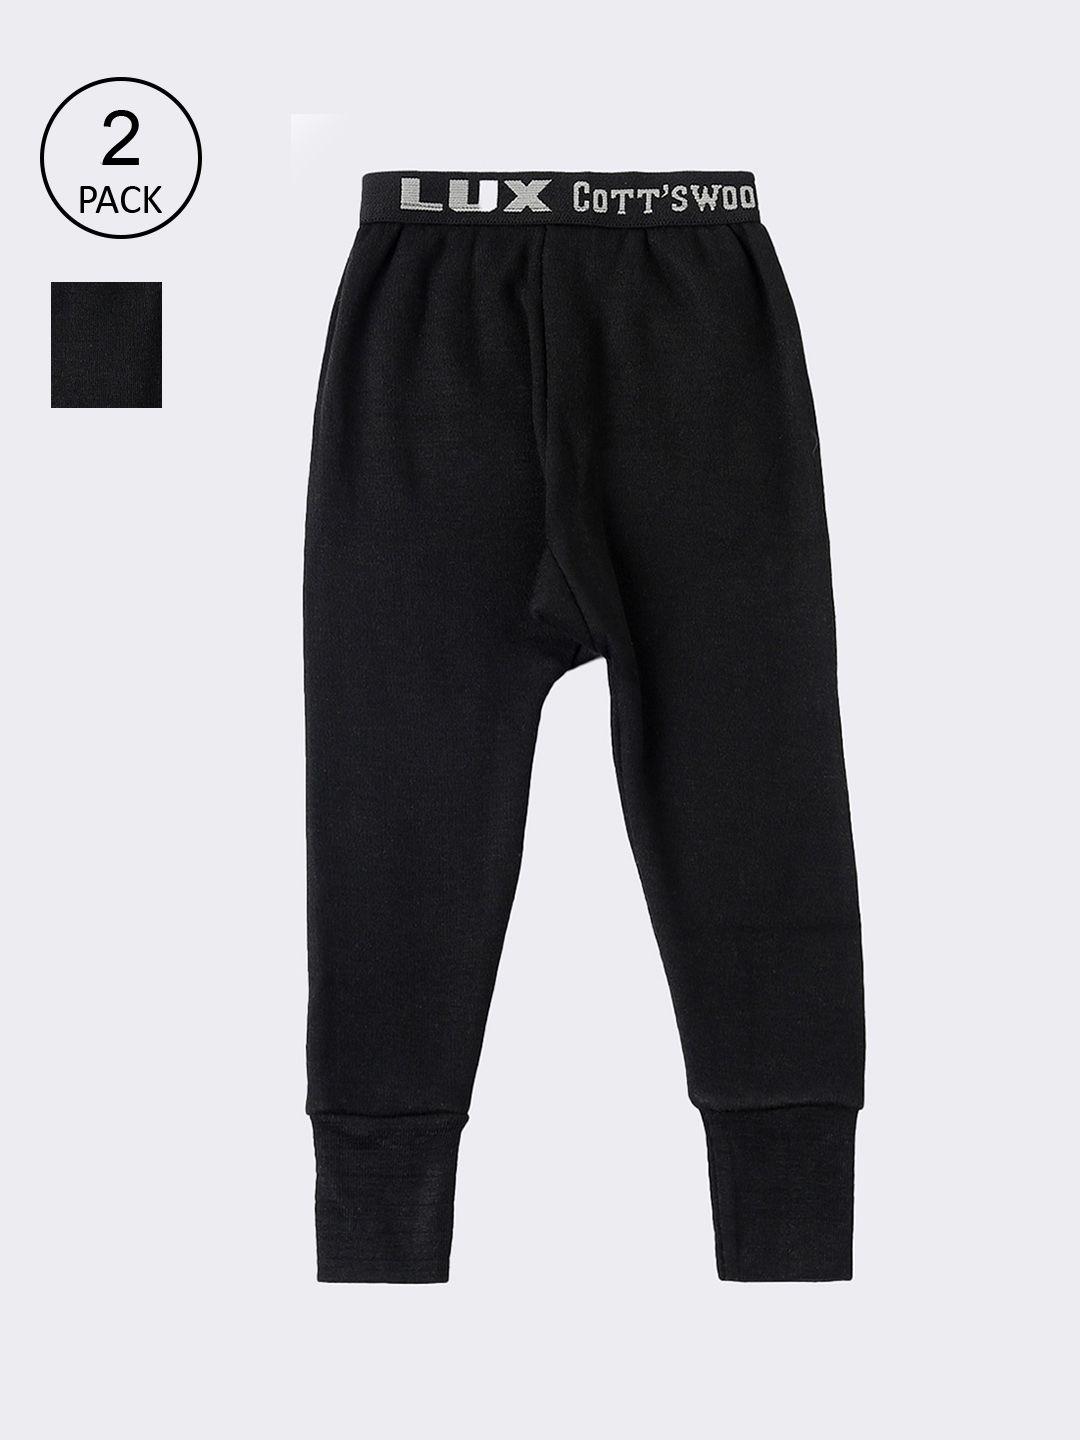 lux cottswool boys black pack of 2 solid cotton thermal bottoms